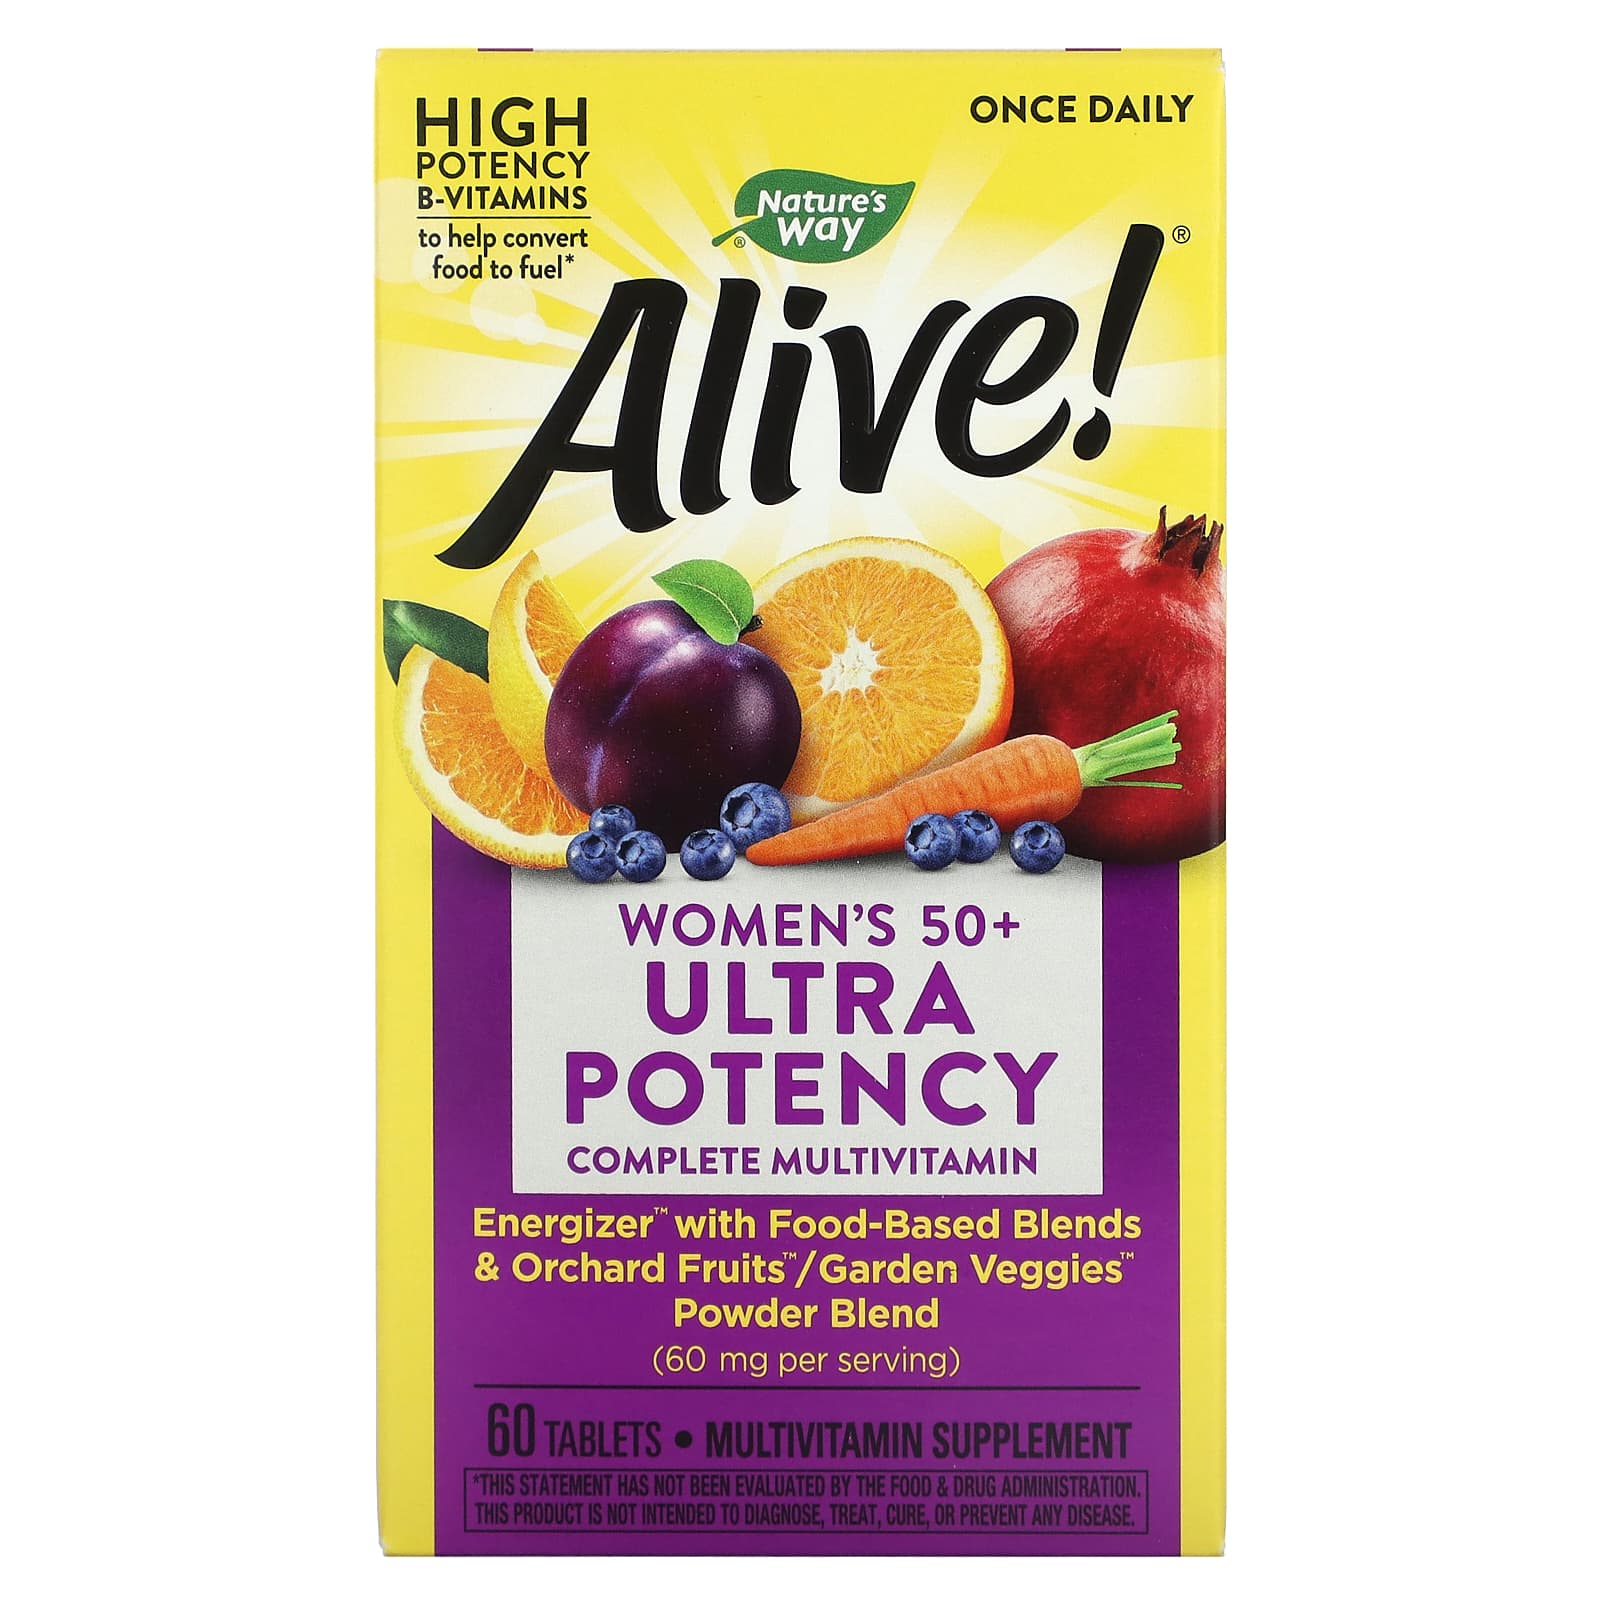 Nature's Way Alive! Once Daily Women's 50+ Ultra Potency Multivitamin Tablets